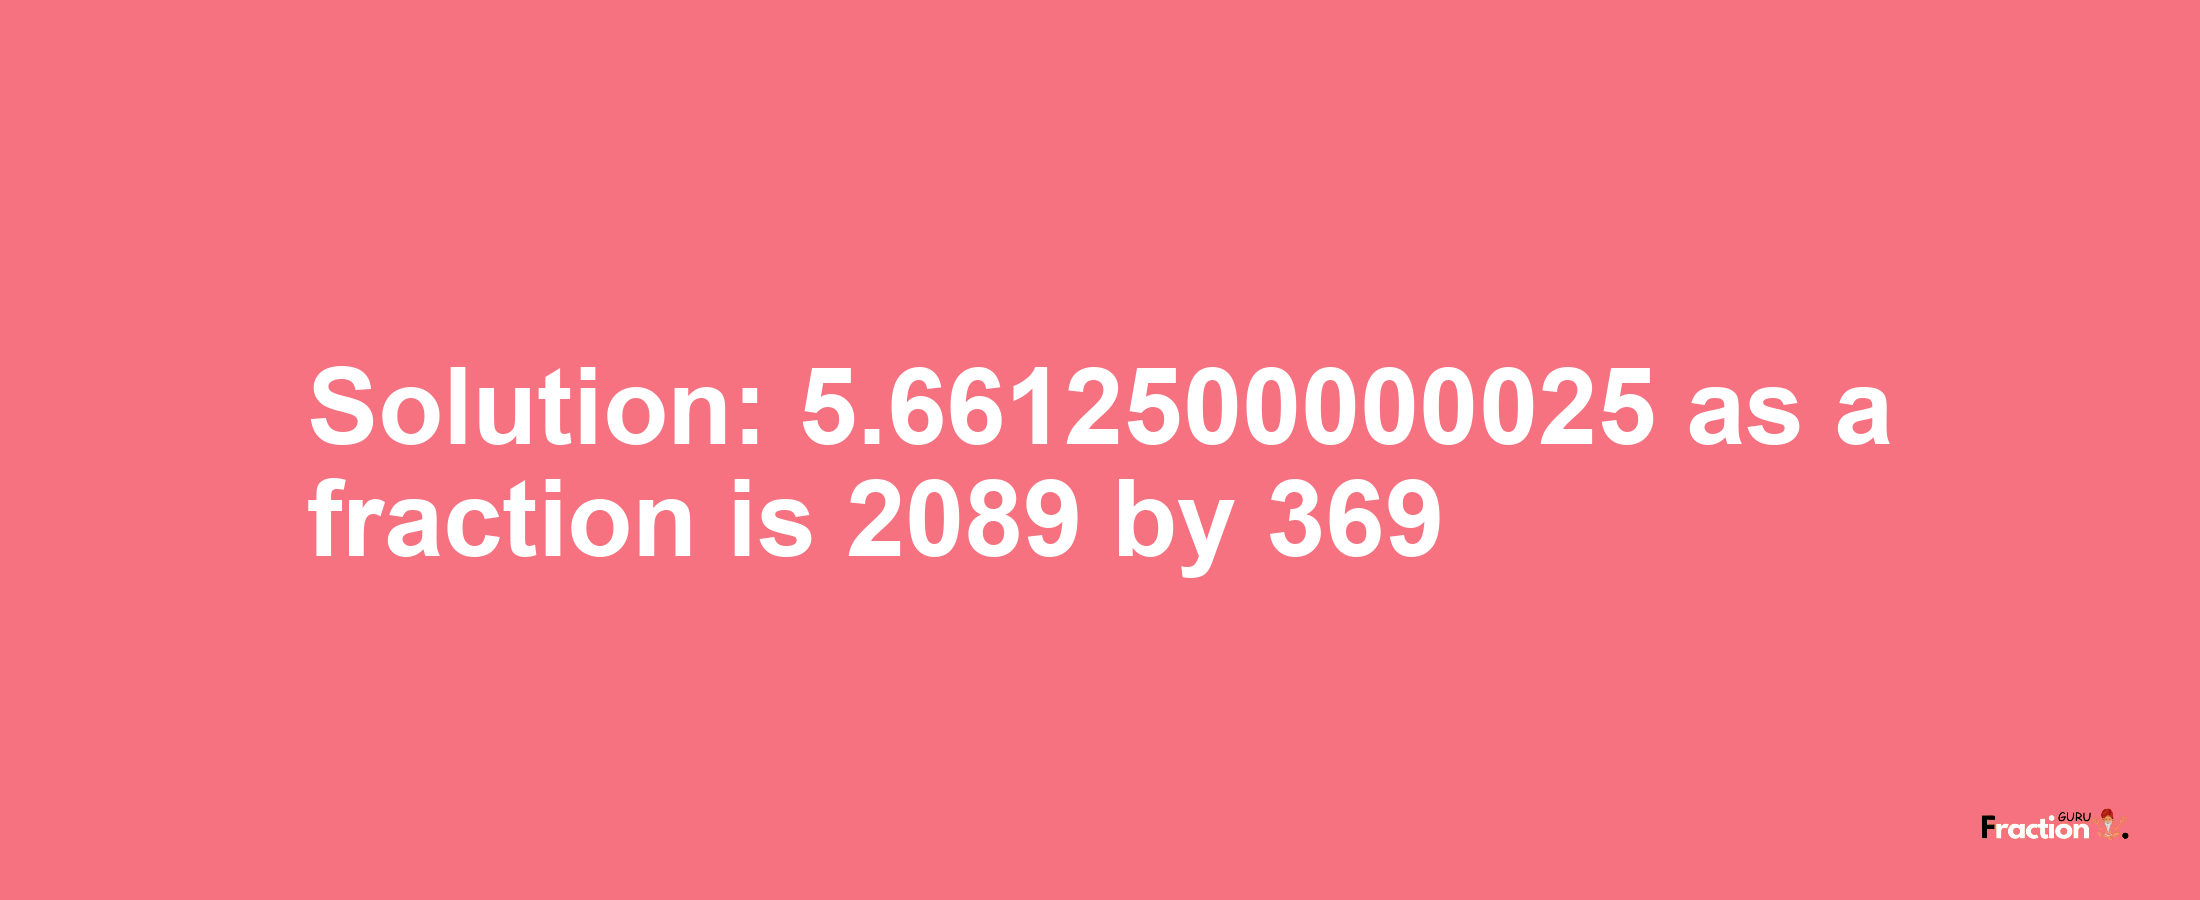 Solution:5.6612500000025 as a fraction is 2089/369